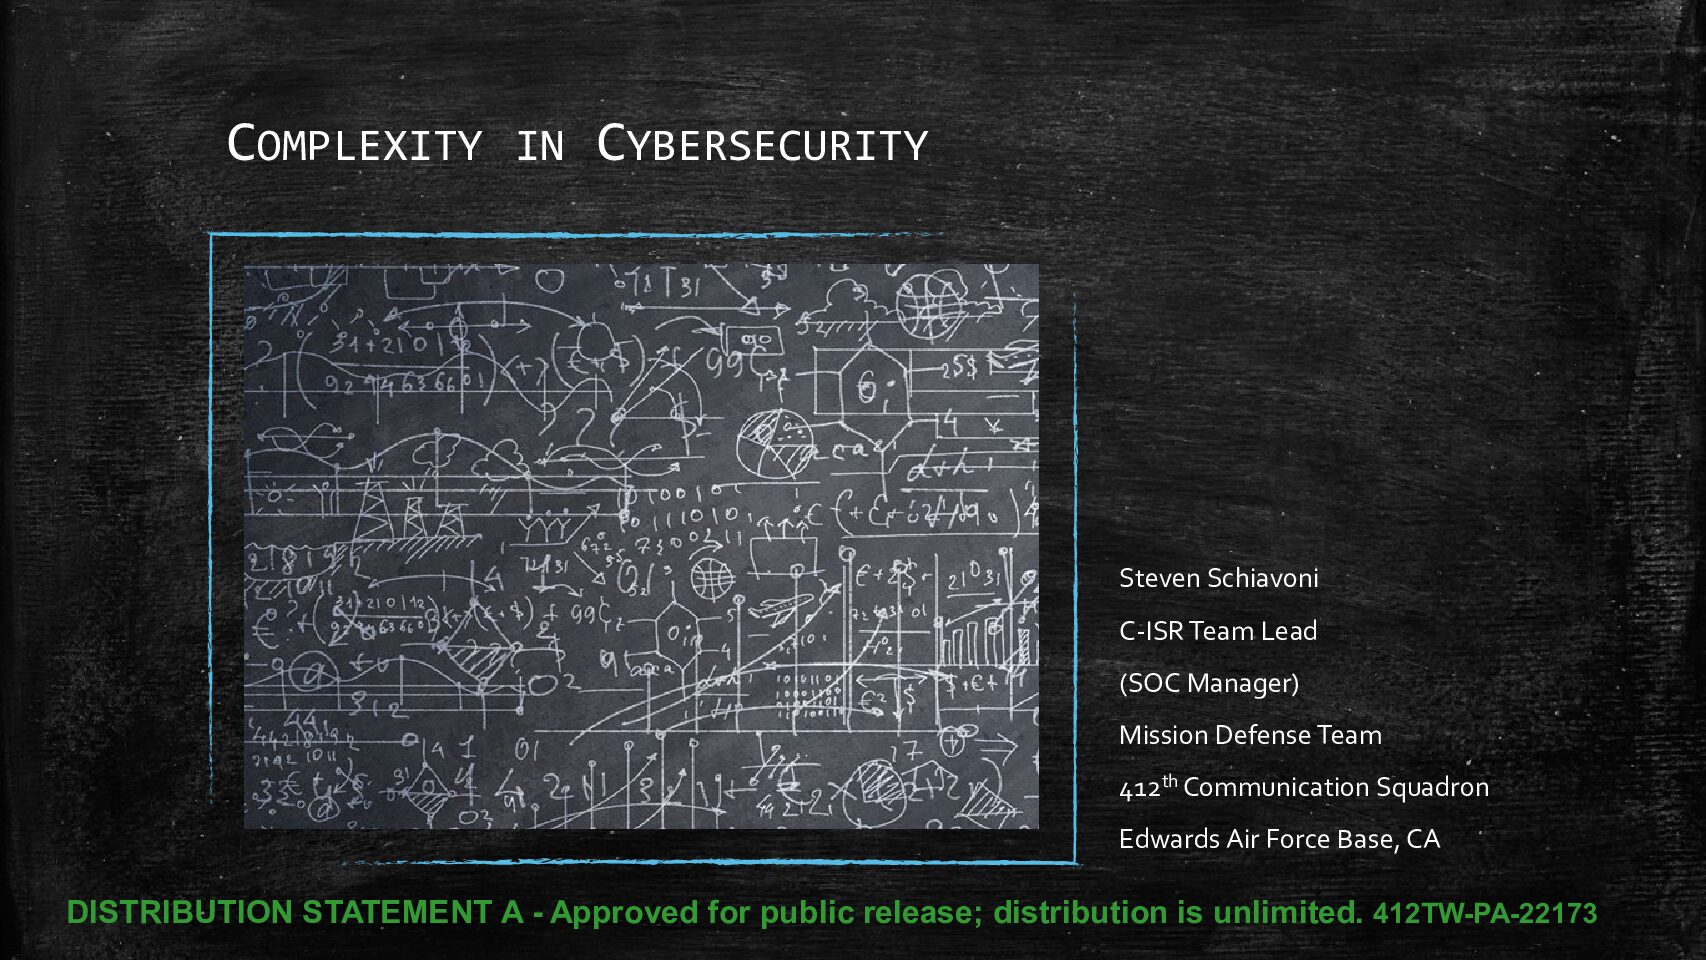 4-1_Schiavoni_Complexity In Cybersecurity